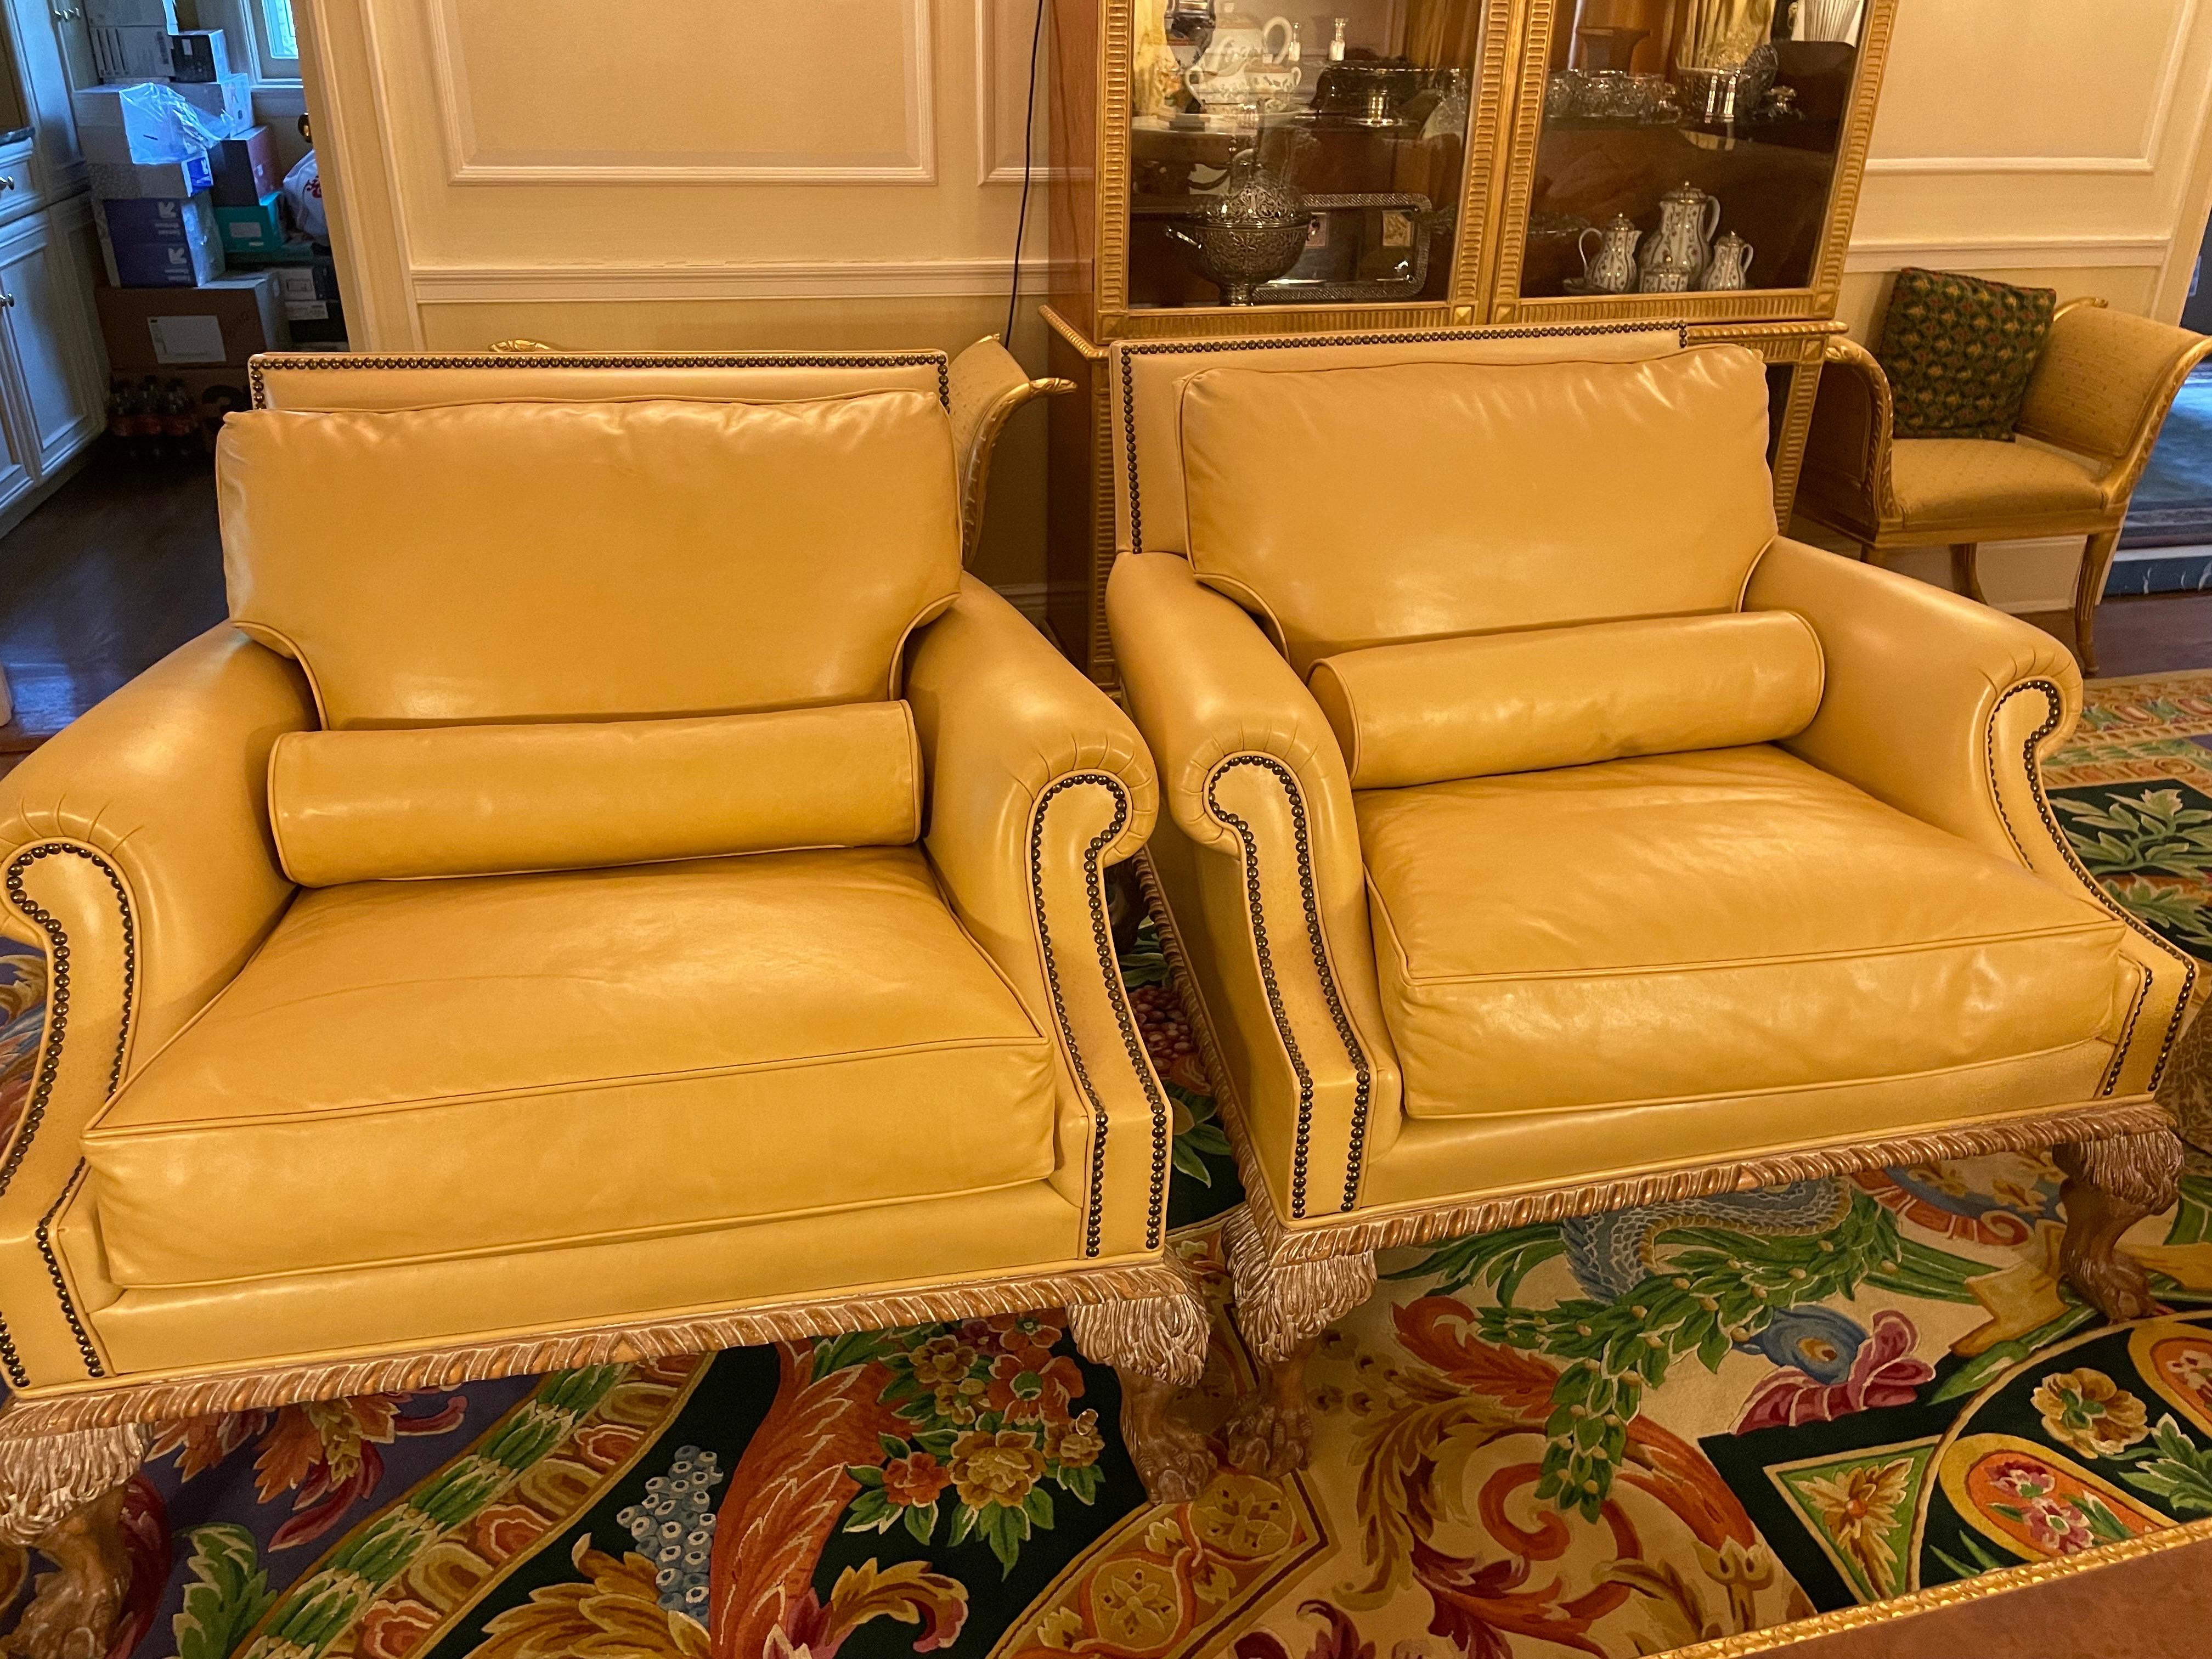 Hand made in Italy by fine Artisans next to Lake Como.
Top Grain Leather, Beige/Yellow color
Hand made circa 2000.
Set of 2 Armchairs
